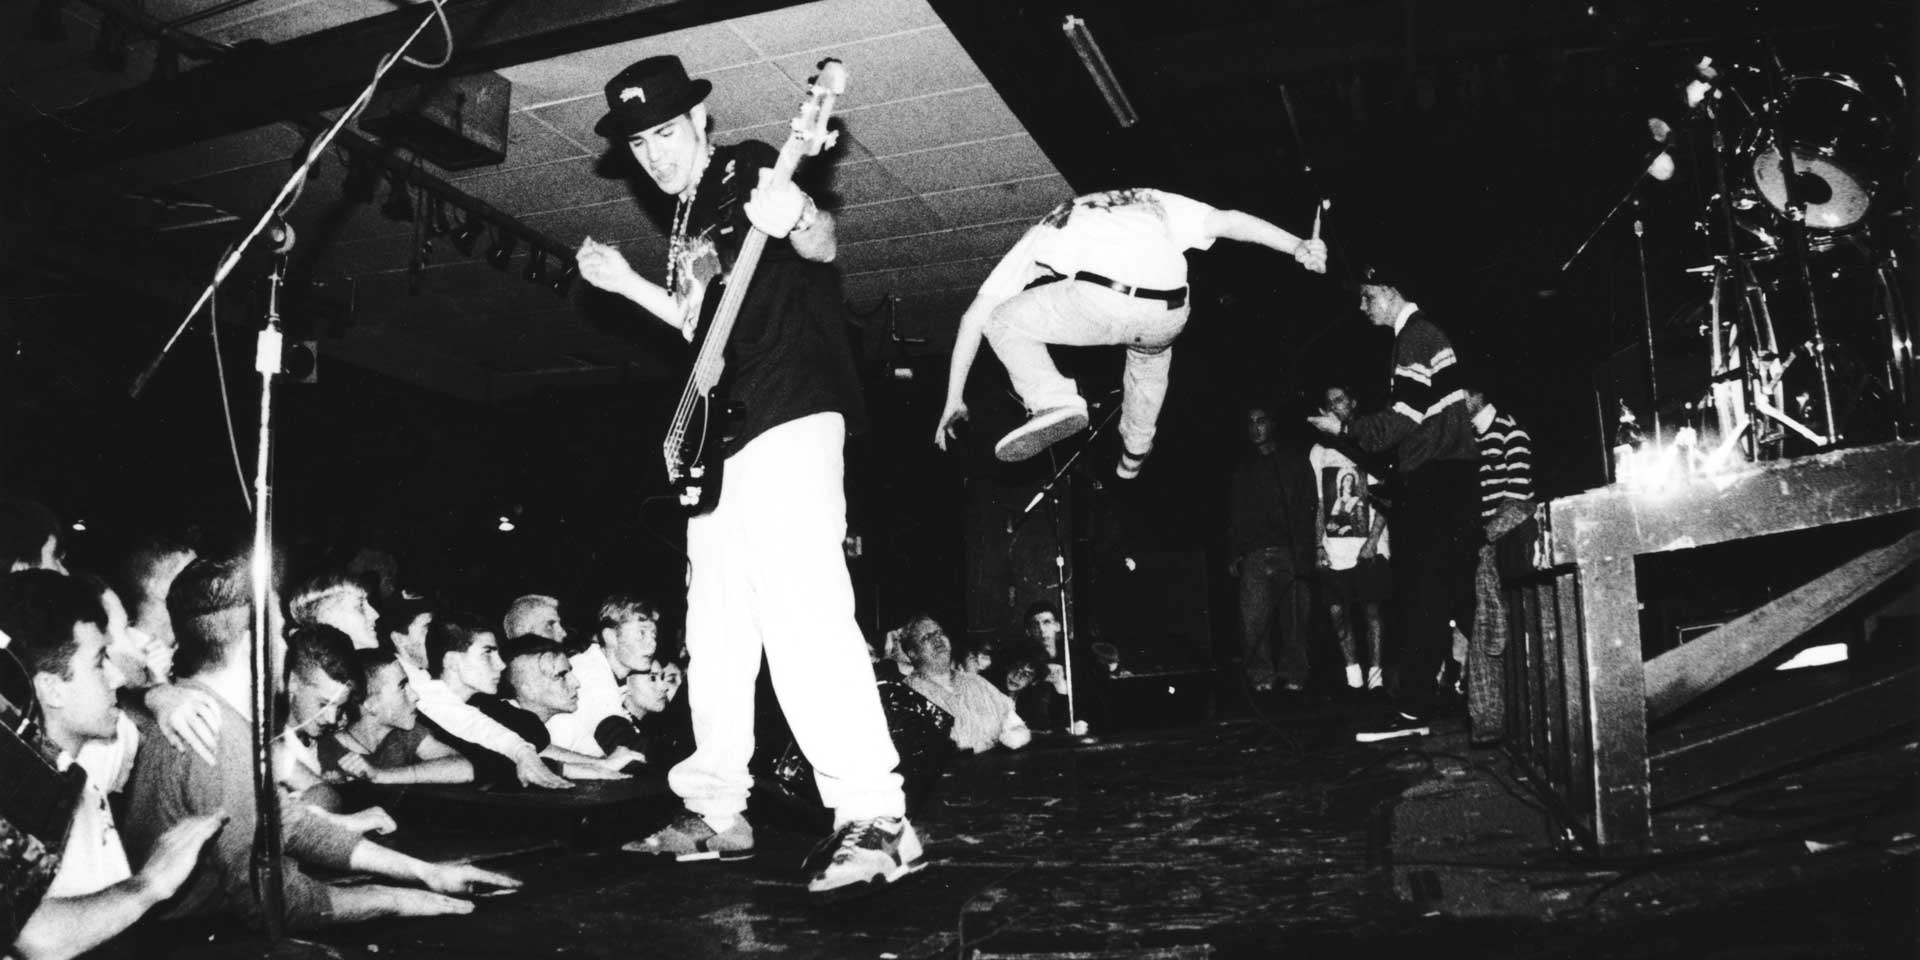 Turning Point at City Gardens. Trention, NJ. 1990. Photo by Steve Silvers.